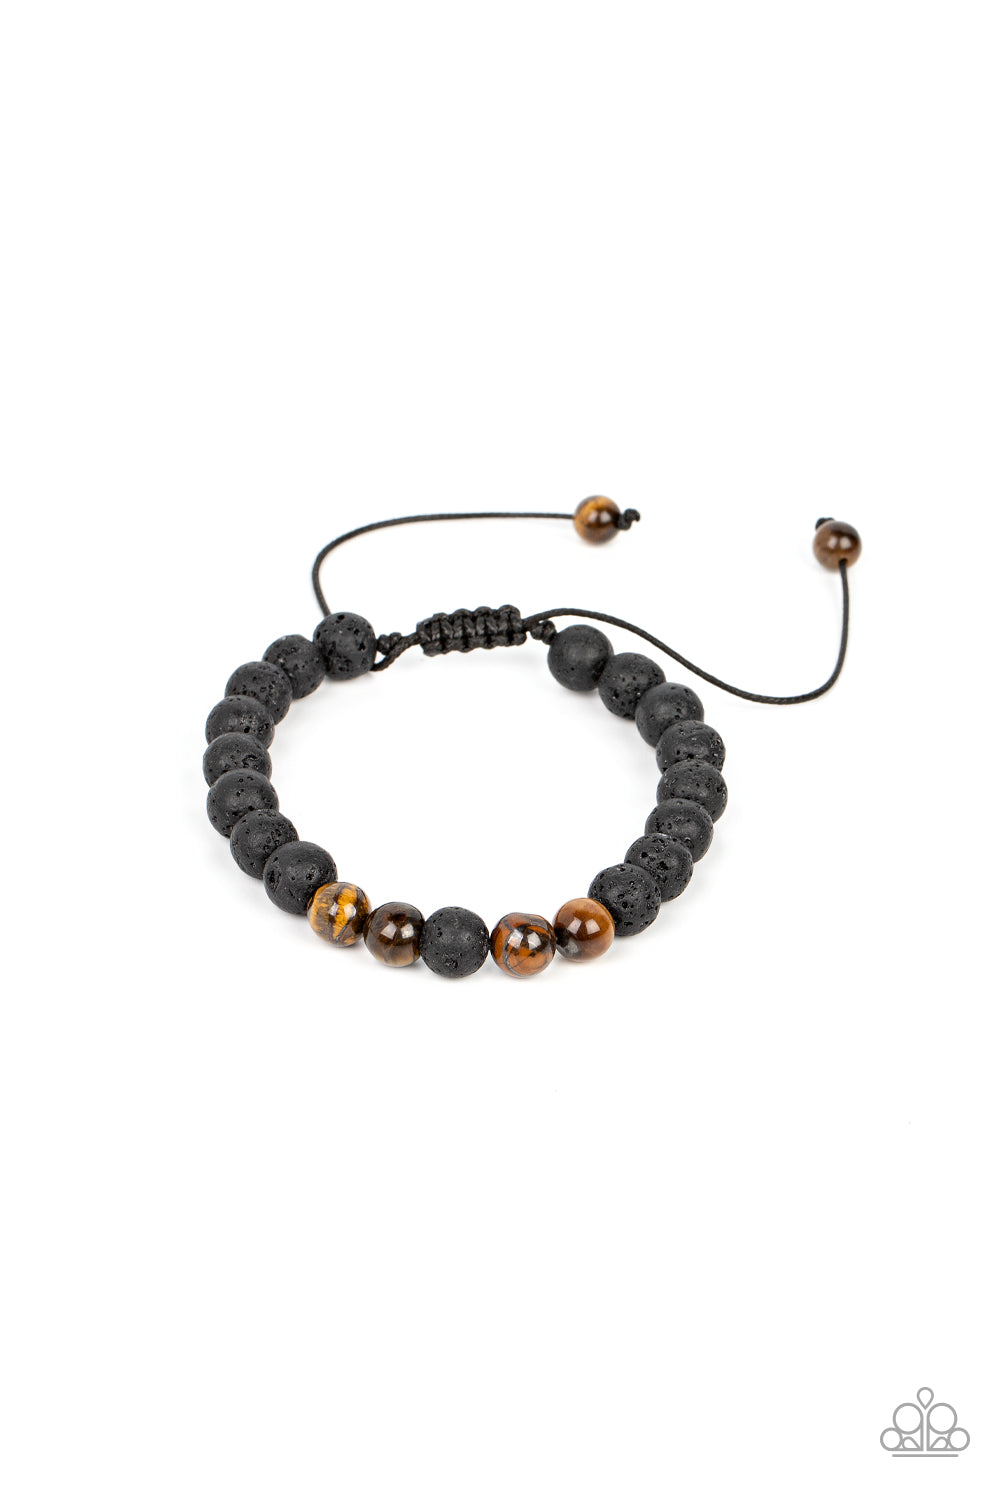 An earthy collection of black lava rock and tiger's eye stone beads are threaded along a black cord around the wrist, resulting in a seasonal pop of color. Features an adjustable sliding knot closure.